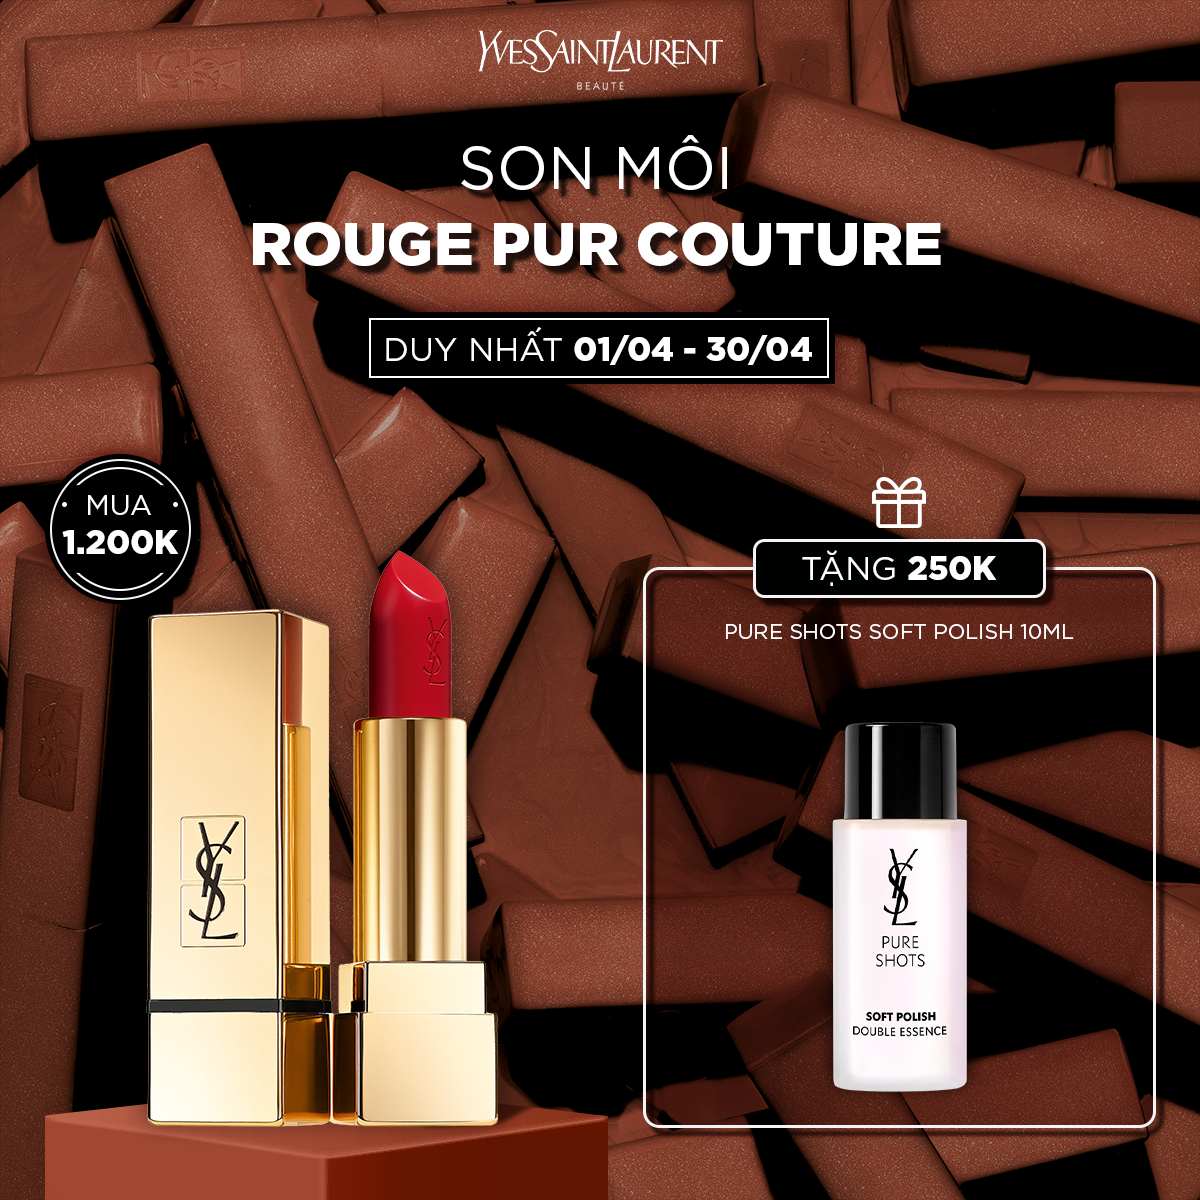 [APR] Son môi Rouge Pur Couture